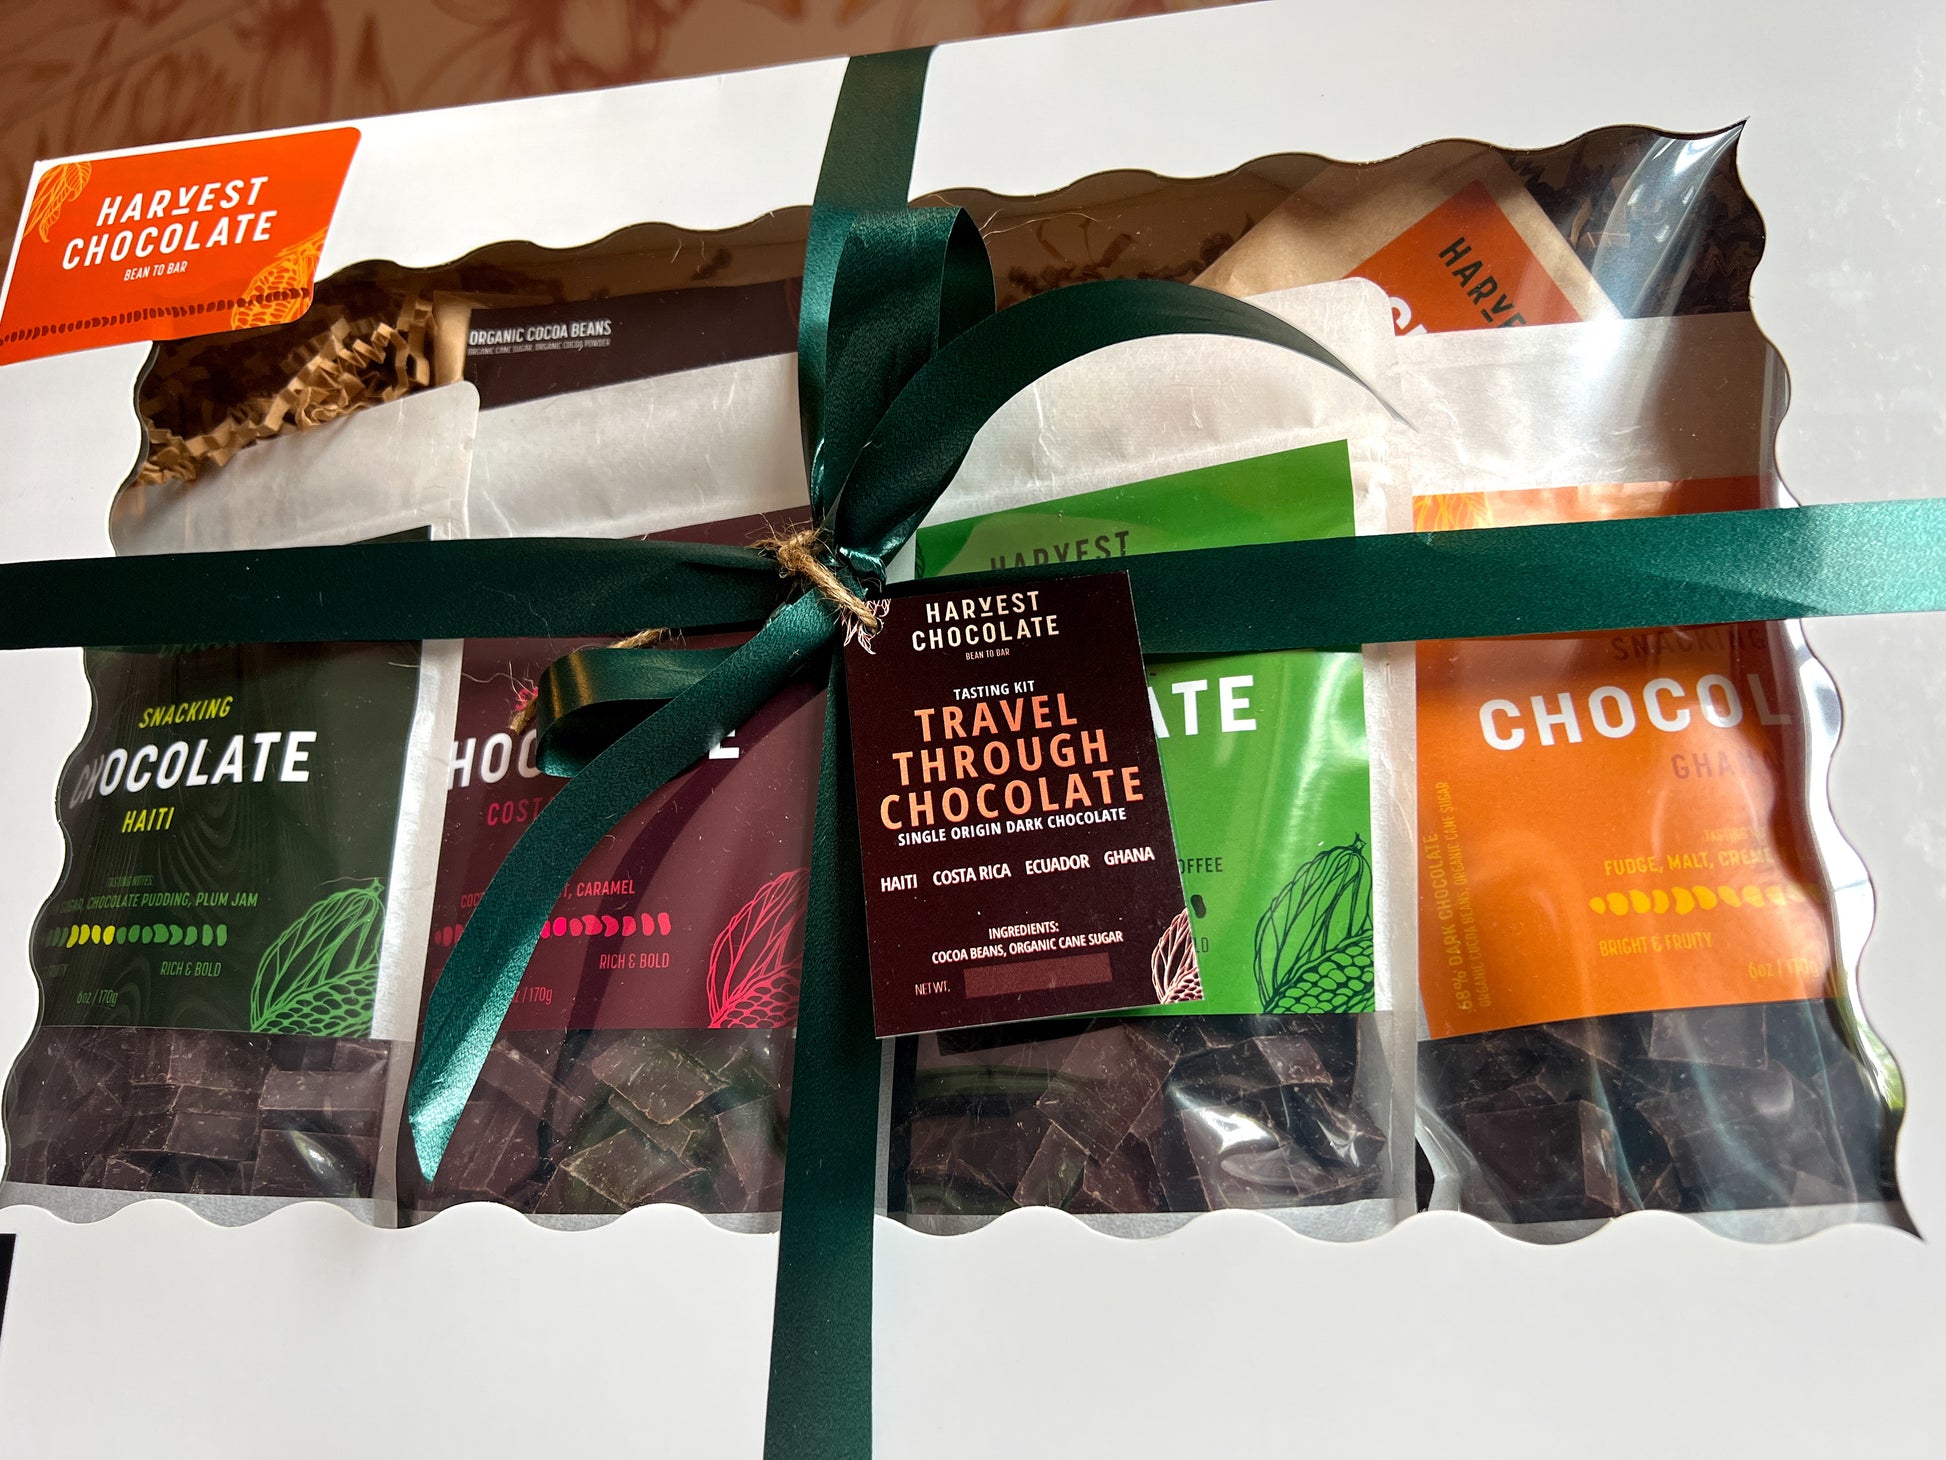 A collection of five Harvest Chocolate Travel Through Chocolate Gift Boxes in colorful wrappers, tied together with a green ribbon and a dried star anise, placed on a marbled surface.